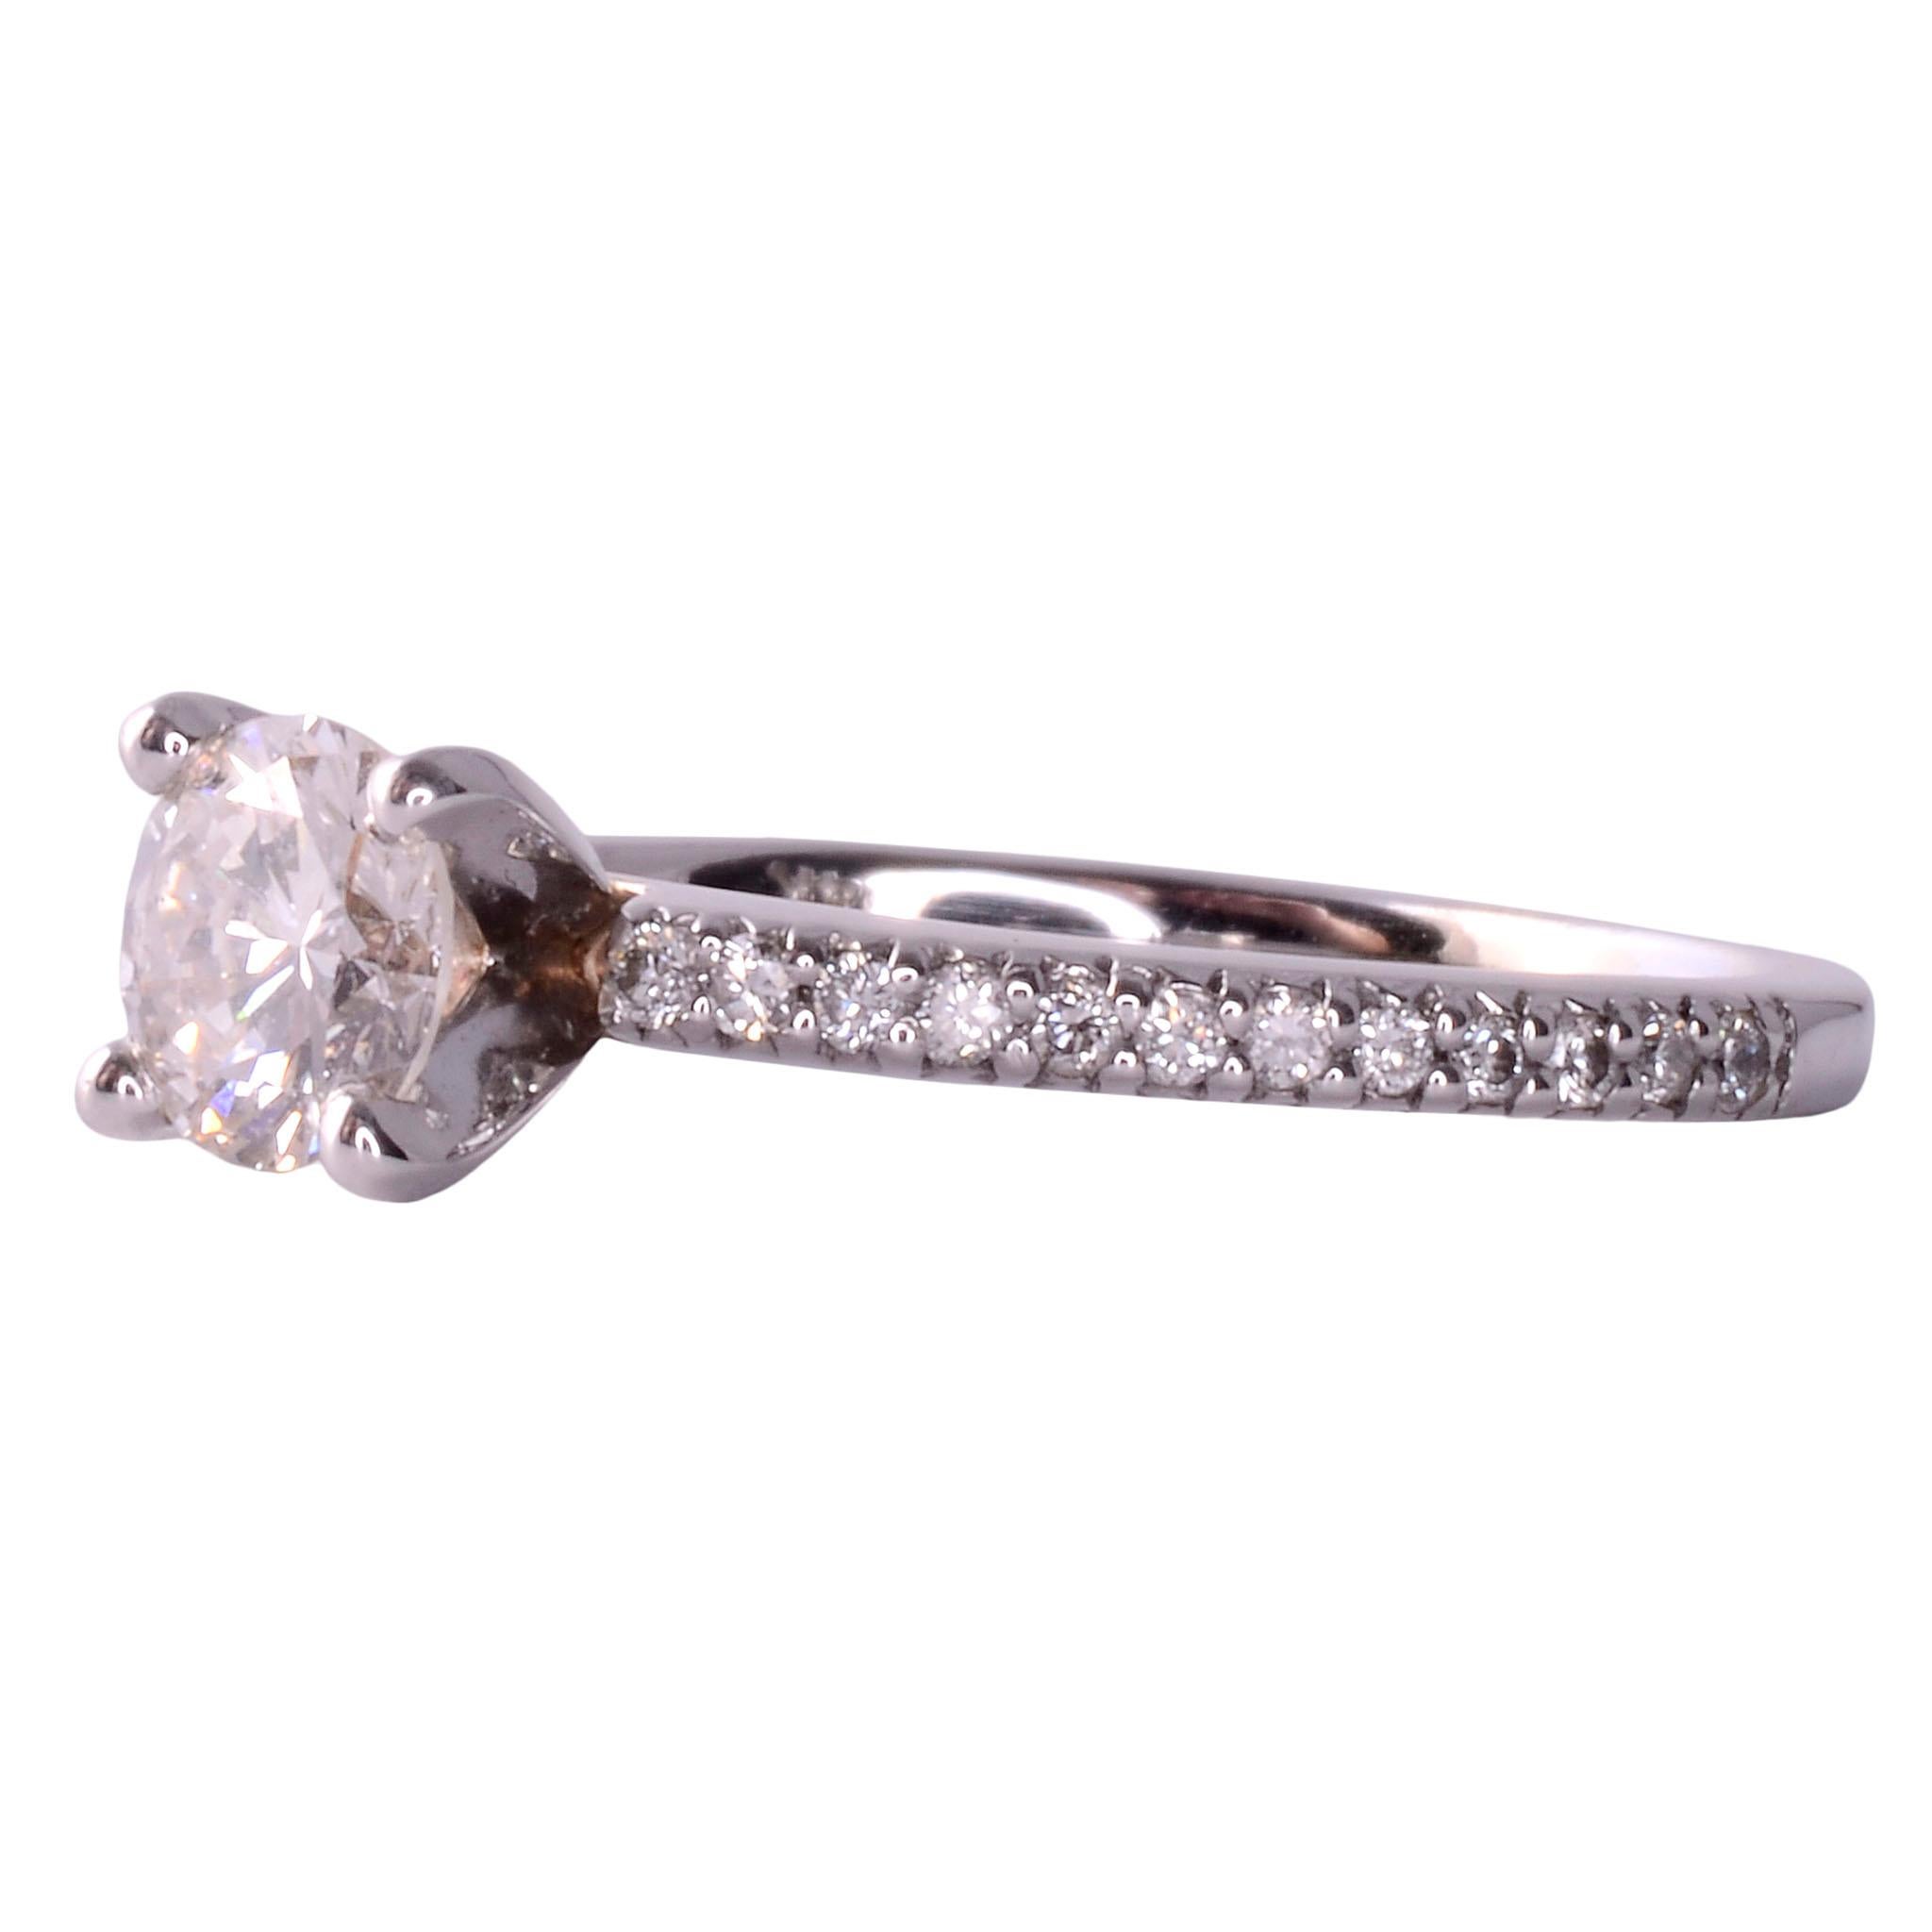 Estate VS diamond engagement ring. This 14 karat white gold engagement ring features a VS1 diamond center at .53 carat with K color. The diamond has a very good cut grade and is accented with 24 full cut diamonds on the band at .25 carat total